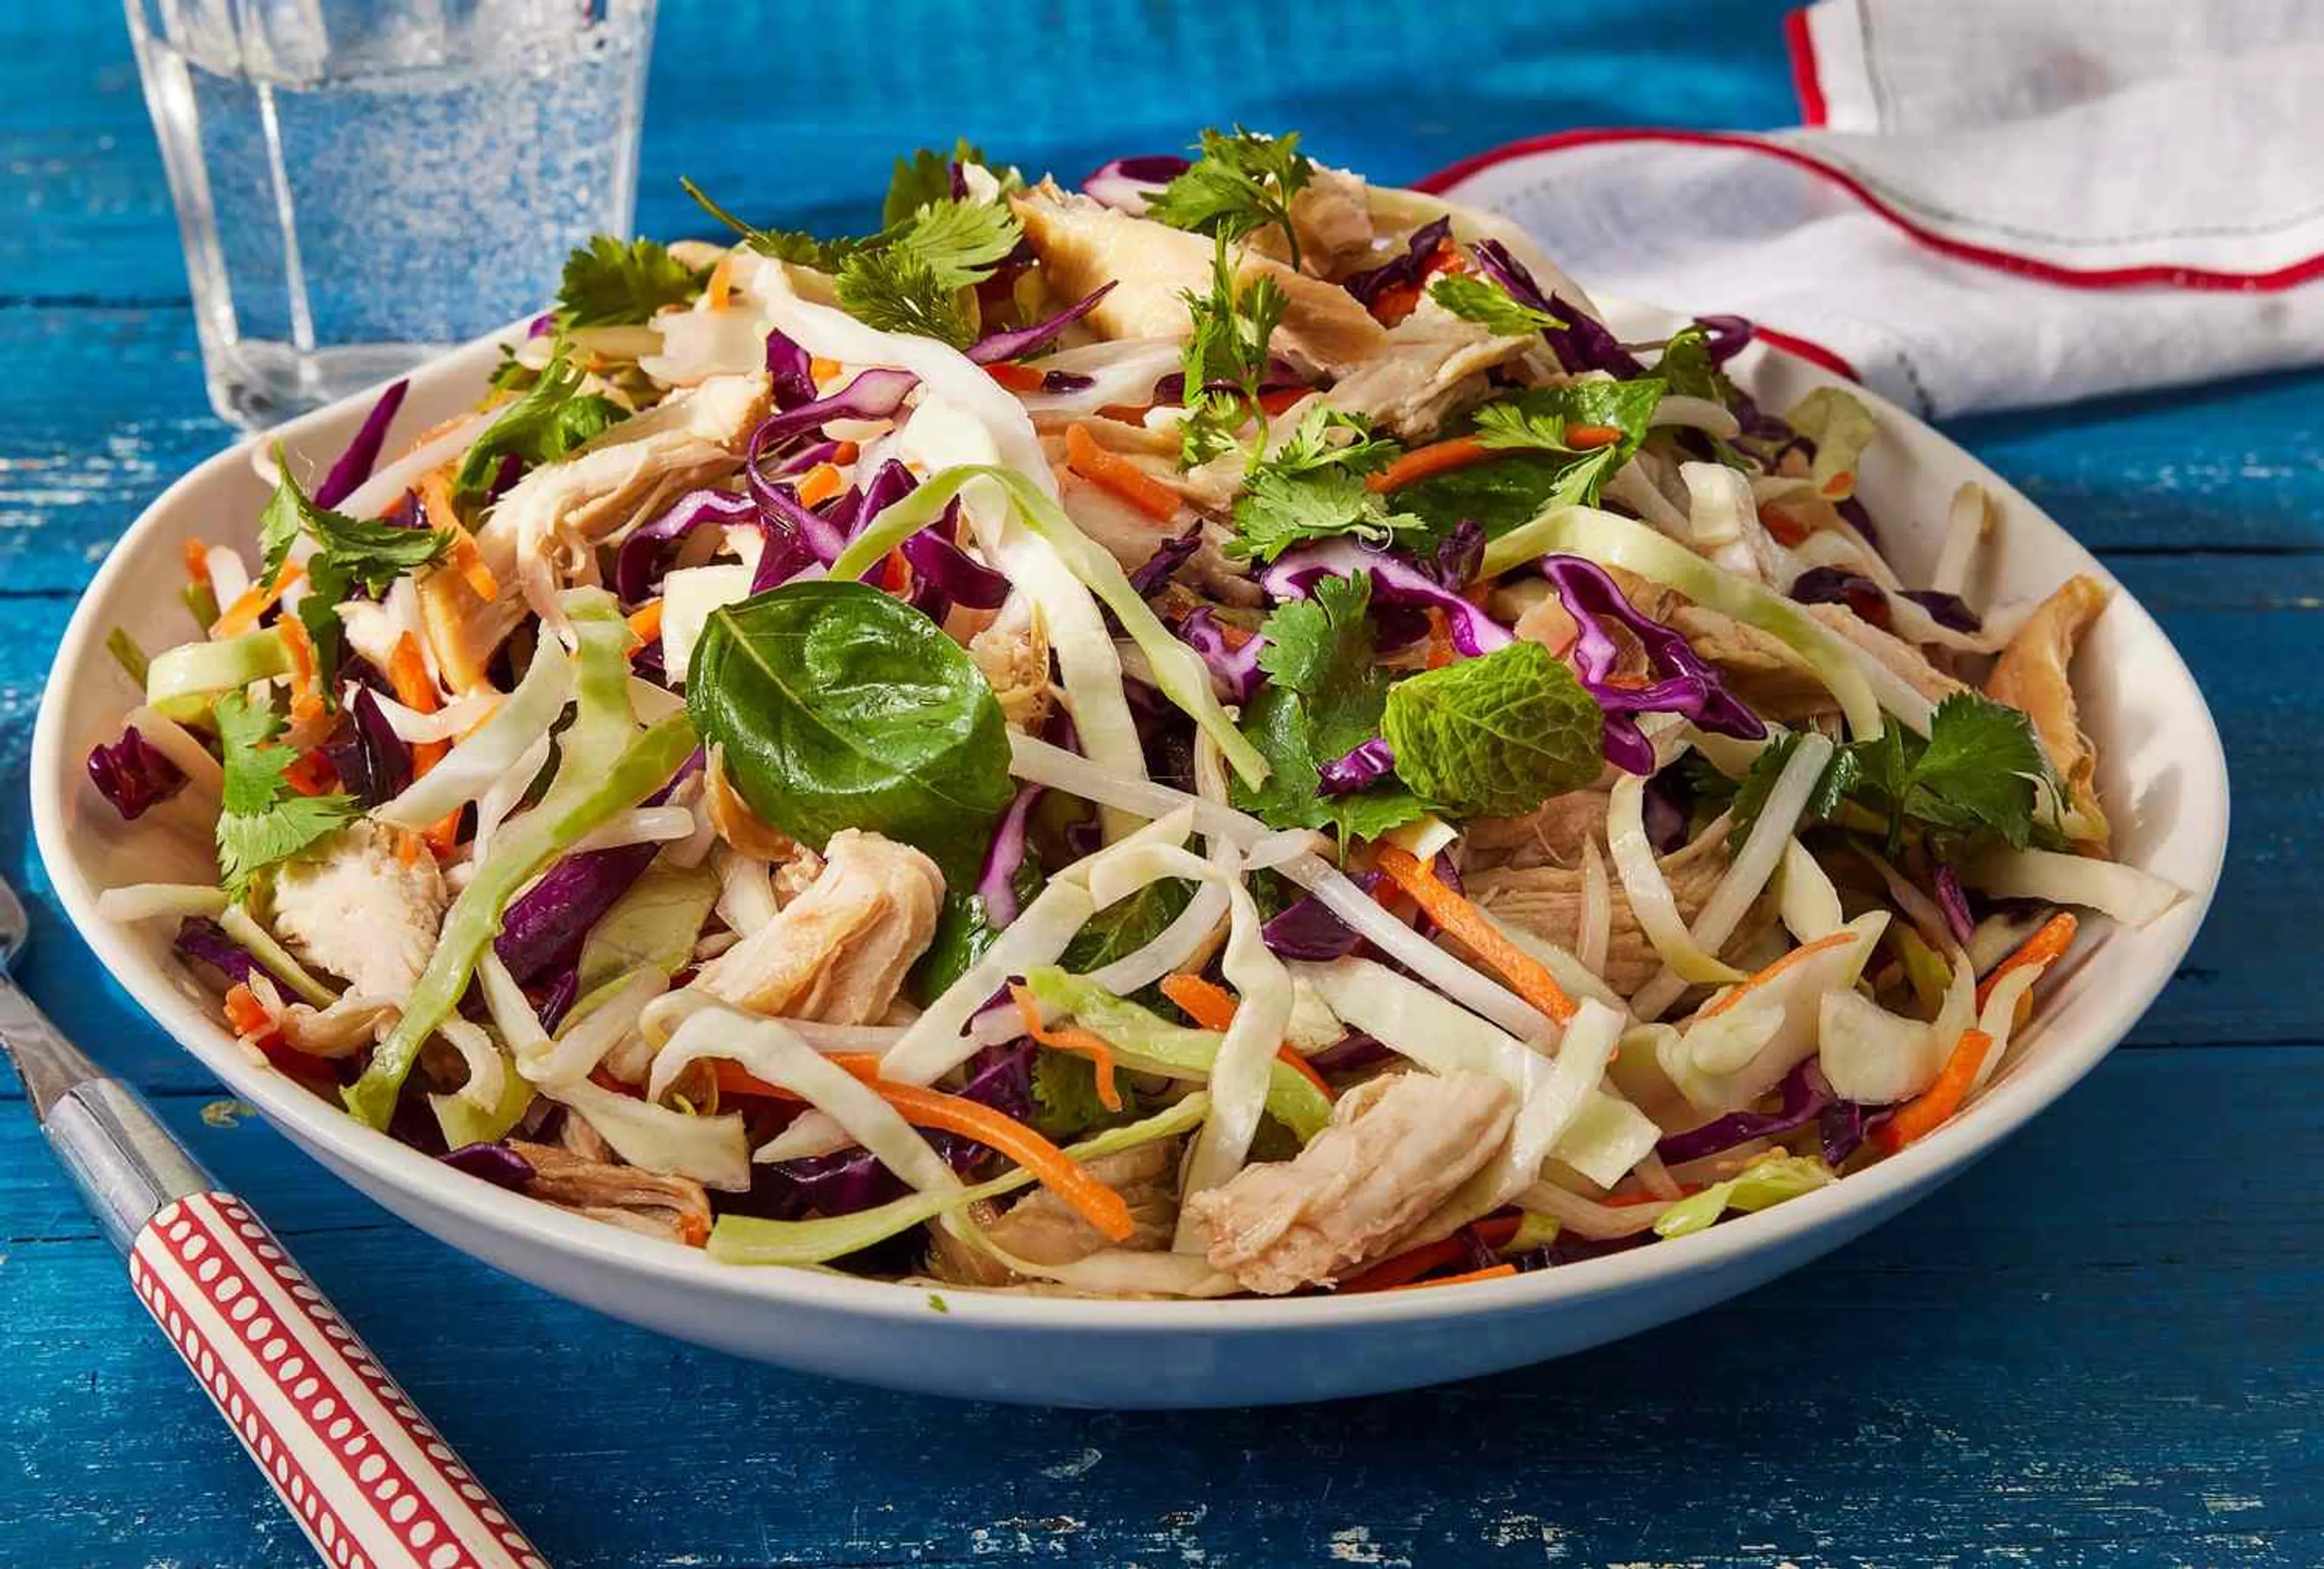 Chicken & Cabbage Salad with Nuoc Cham Dressing